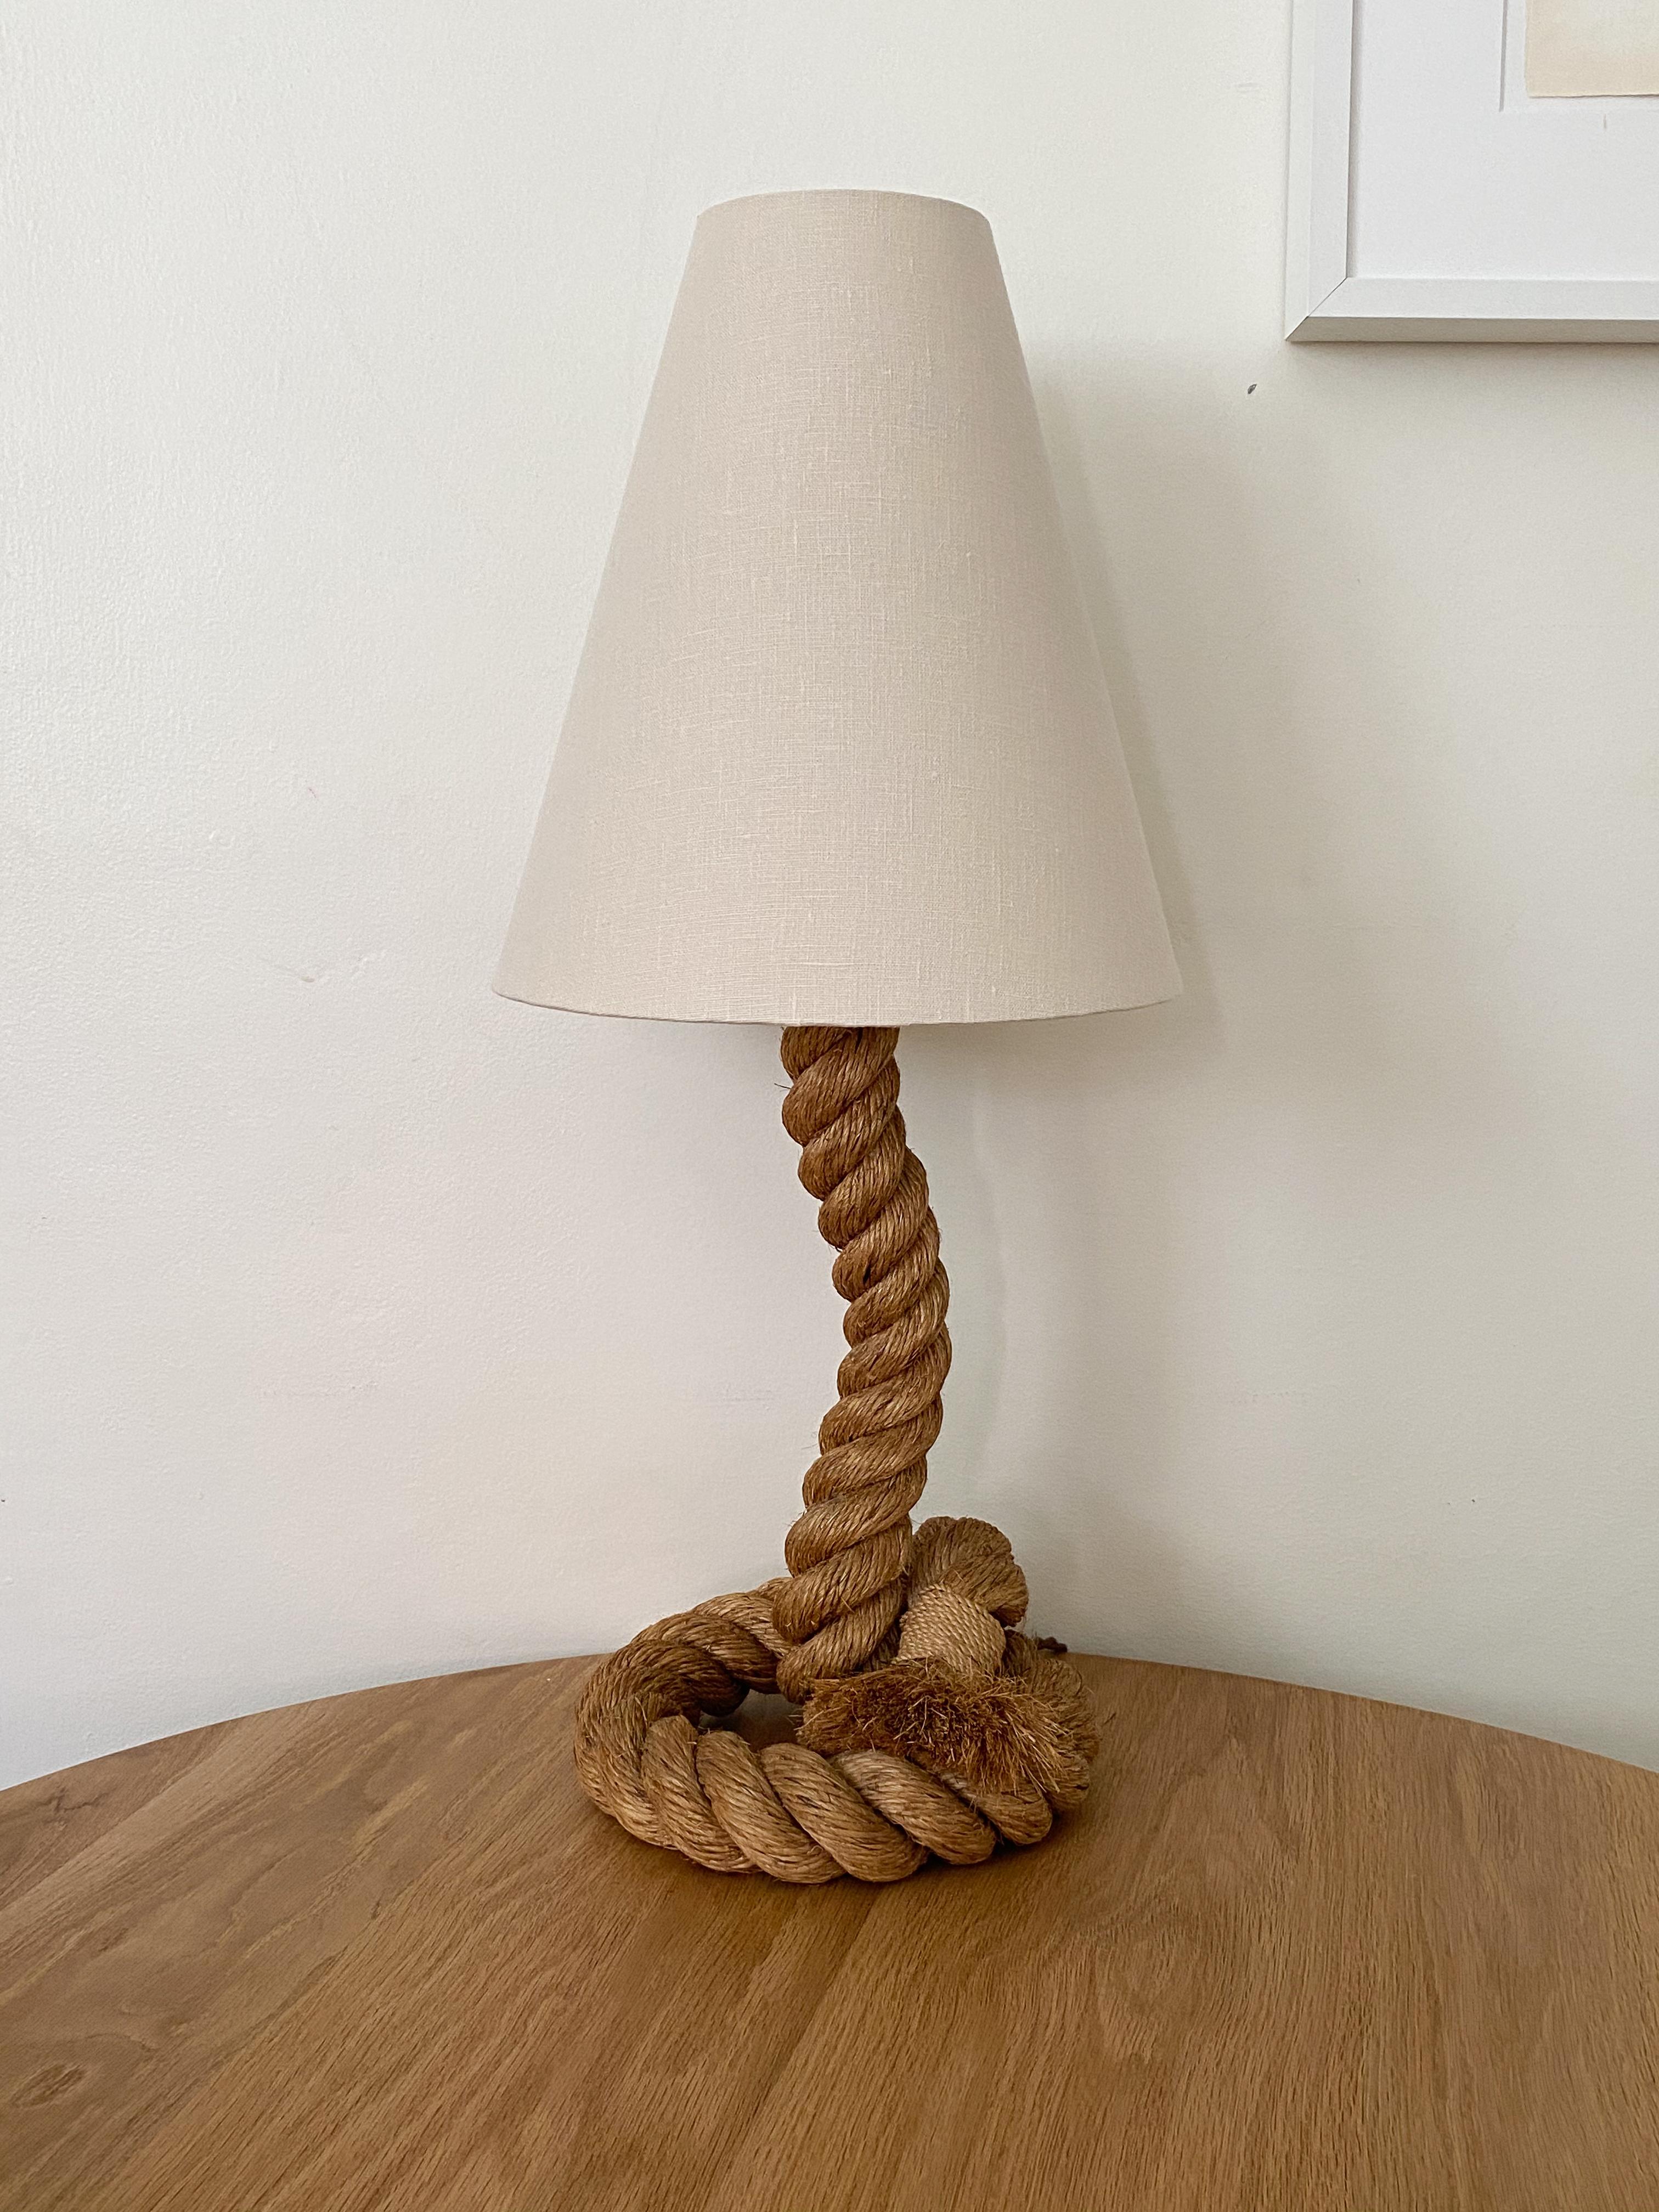 Large rope table lamp by Adrien Audoux & Frida Minet, France, 1950s. Beautiful thick rope in twisted sculptural form. Excellent condition. New linen shade and newly re-wired.

Measures: Overall height 28